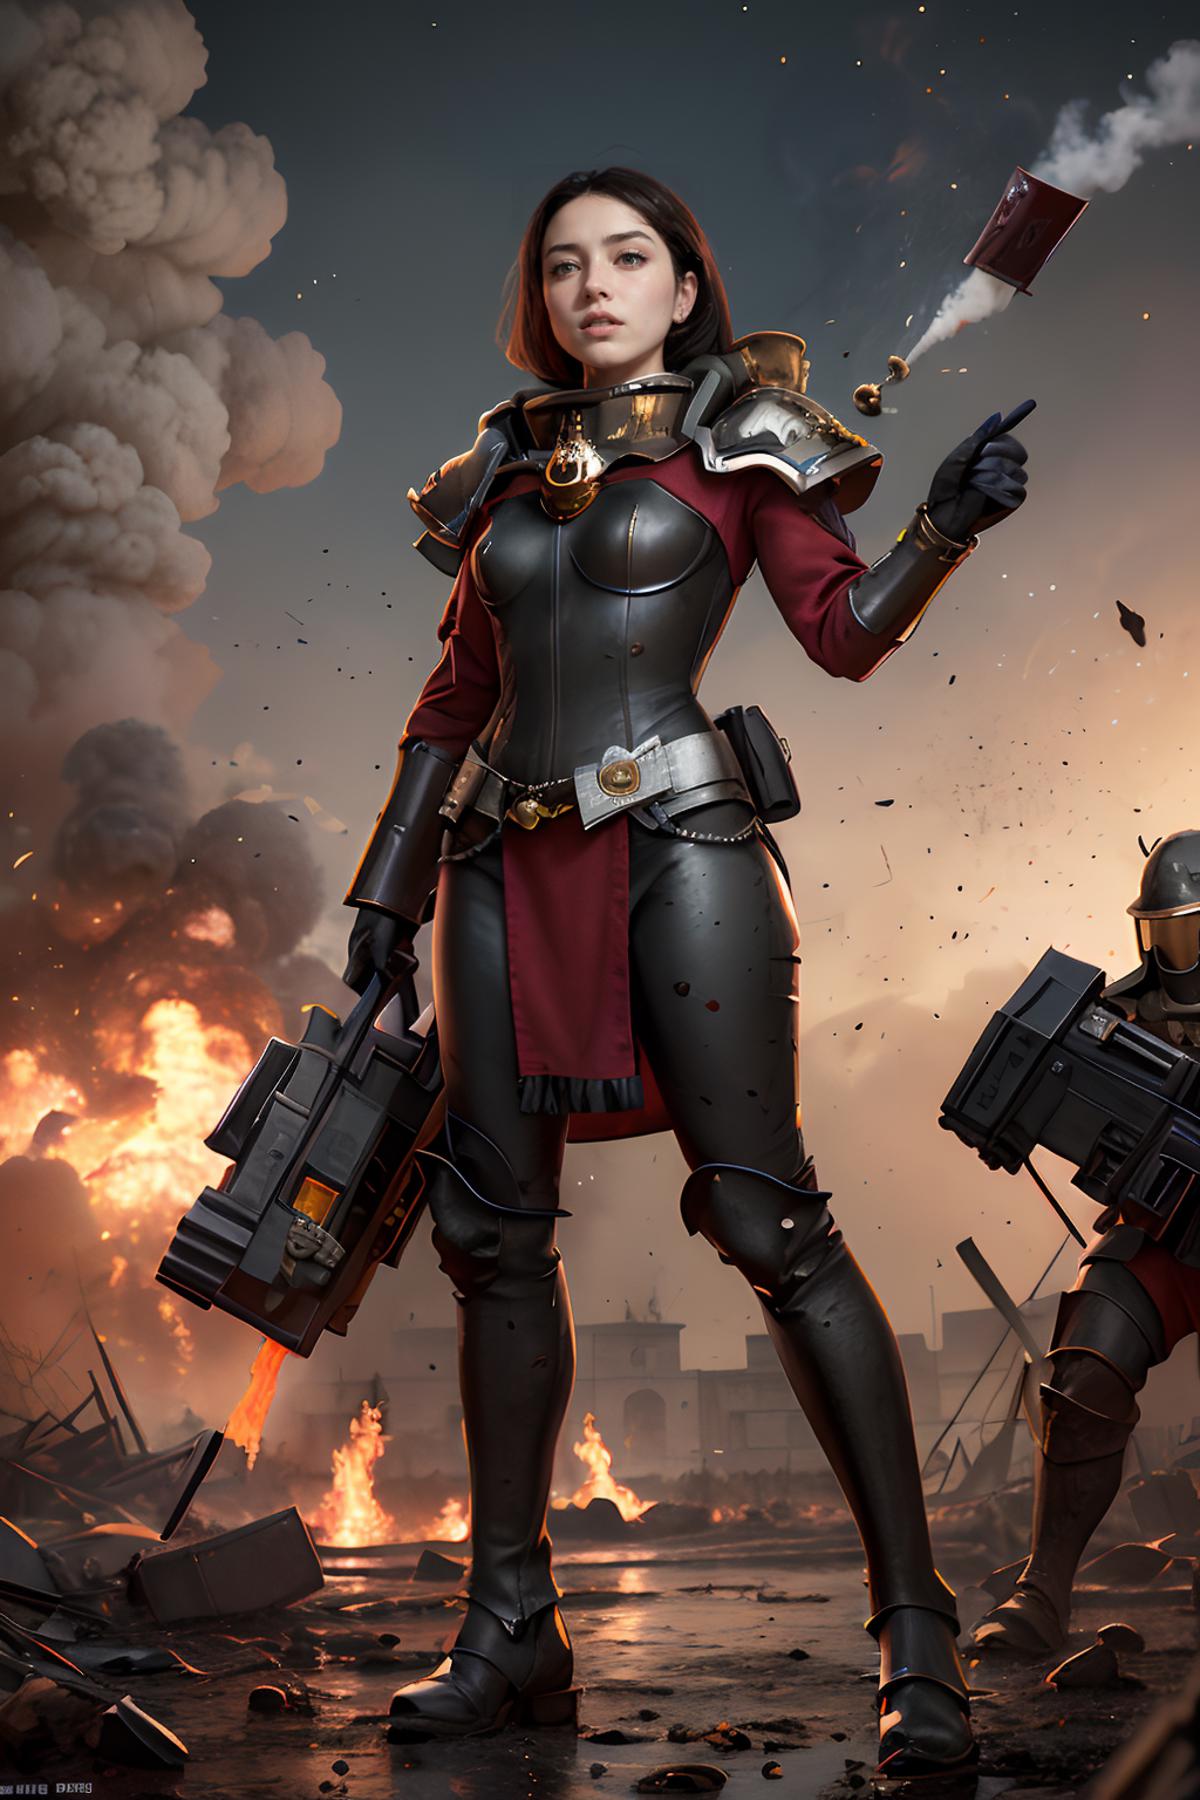 Warhammer 40K Sisters of Battle image by threepennie